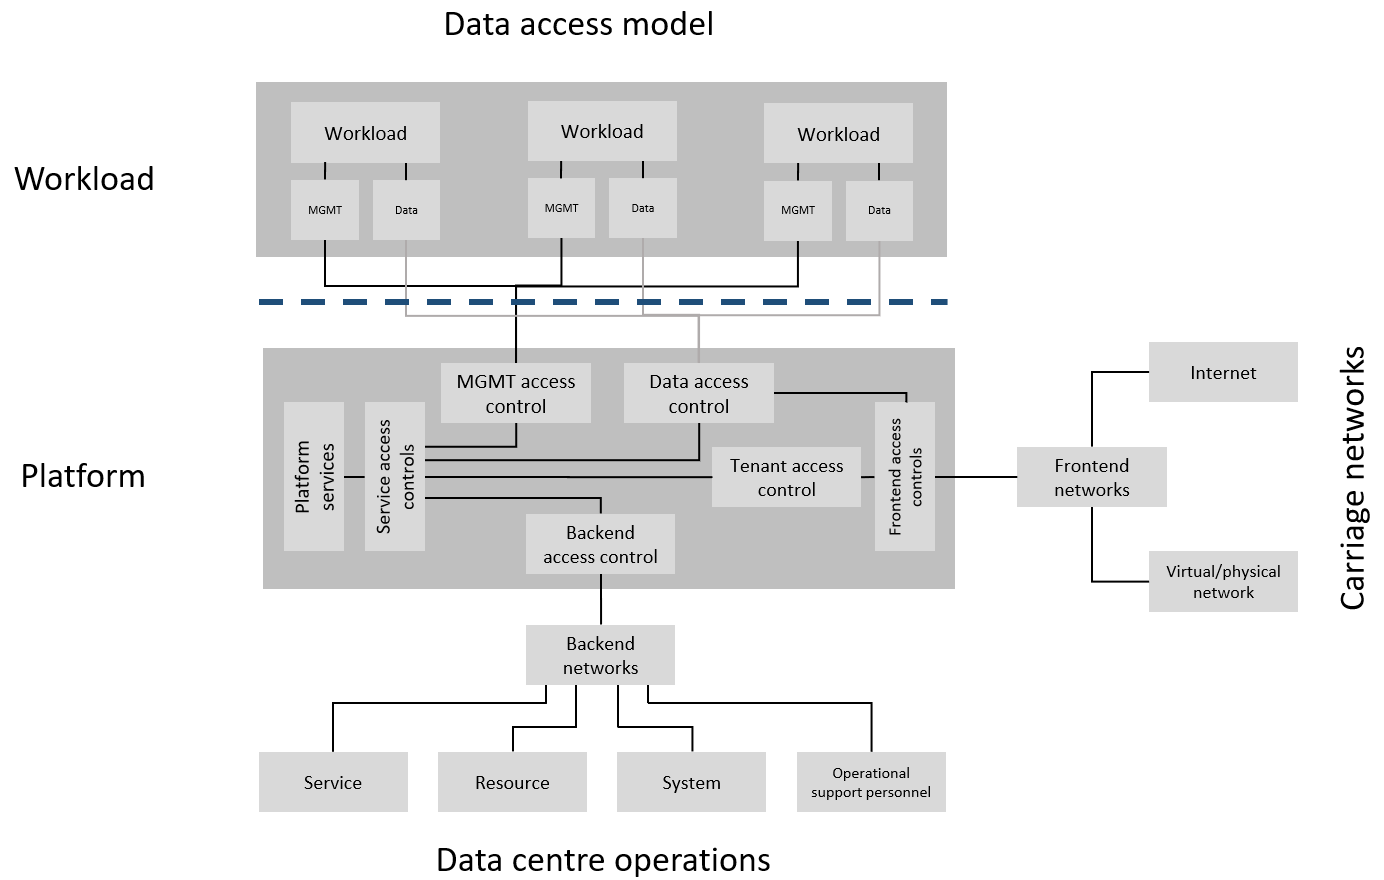 "Reference Model Access Controls"